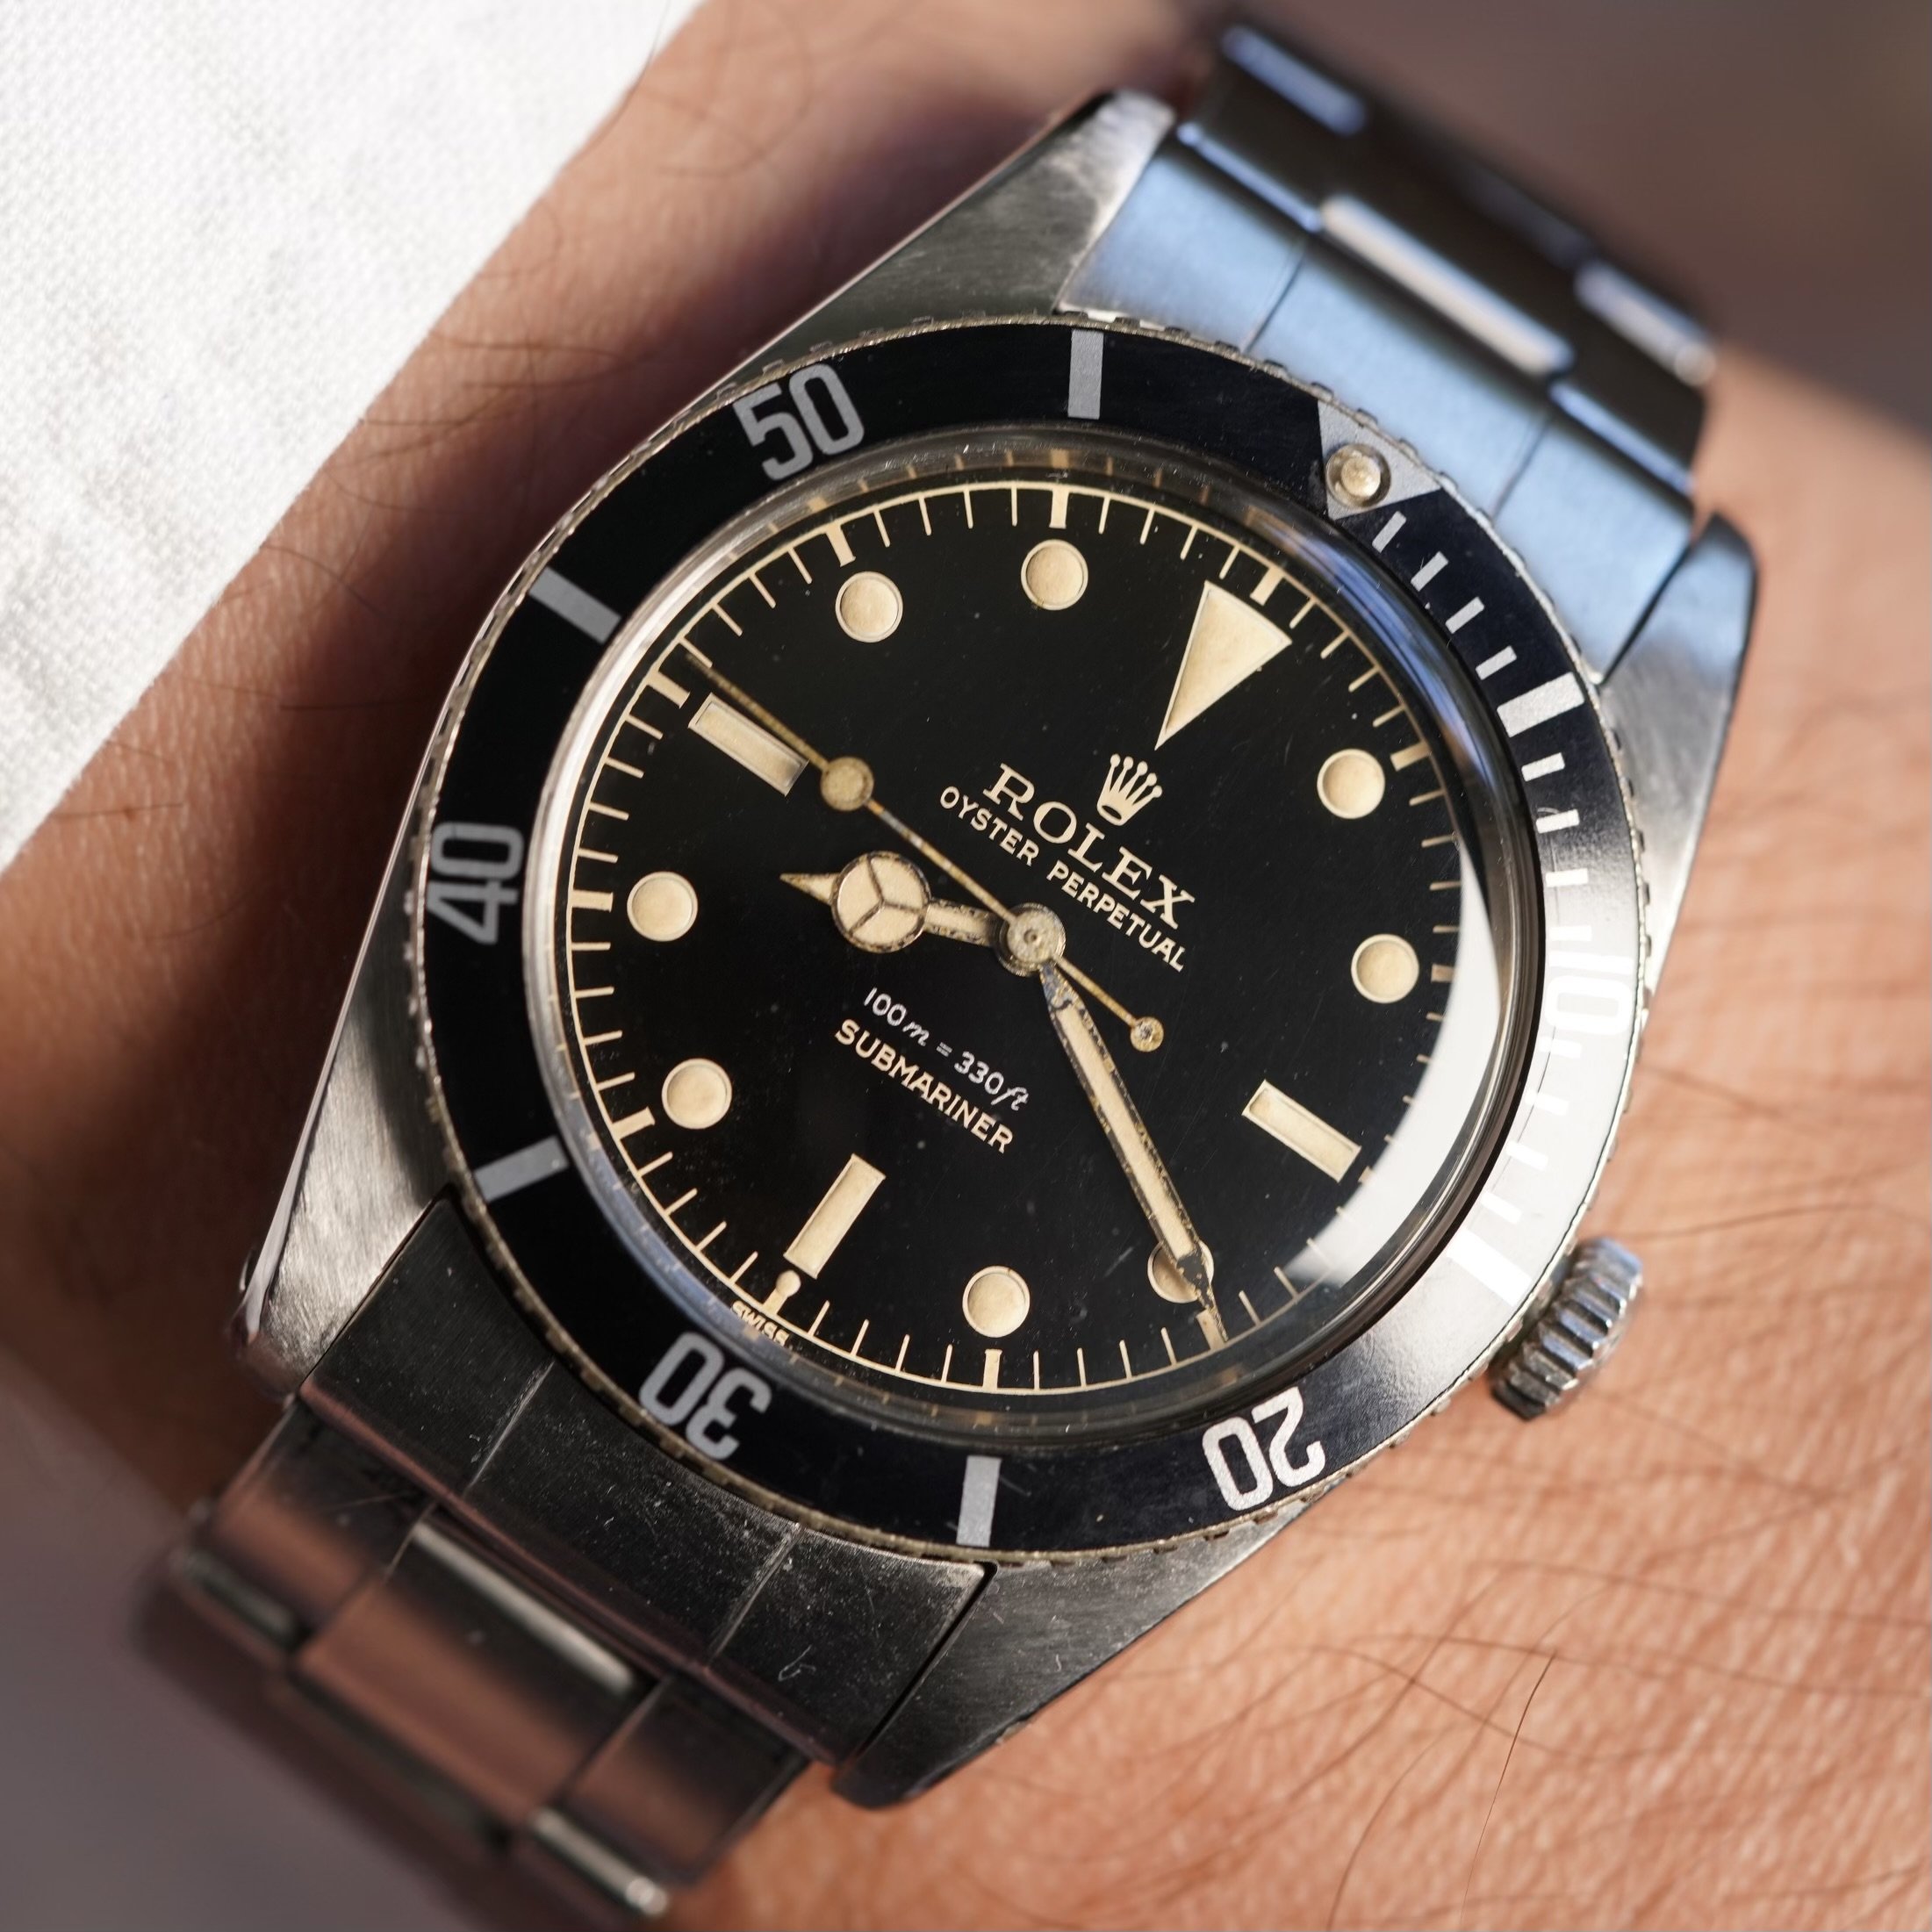 Submariner Reference 5508 Glossy Wind Vintage